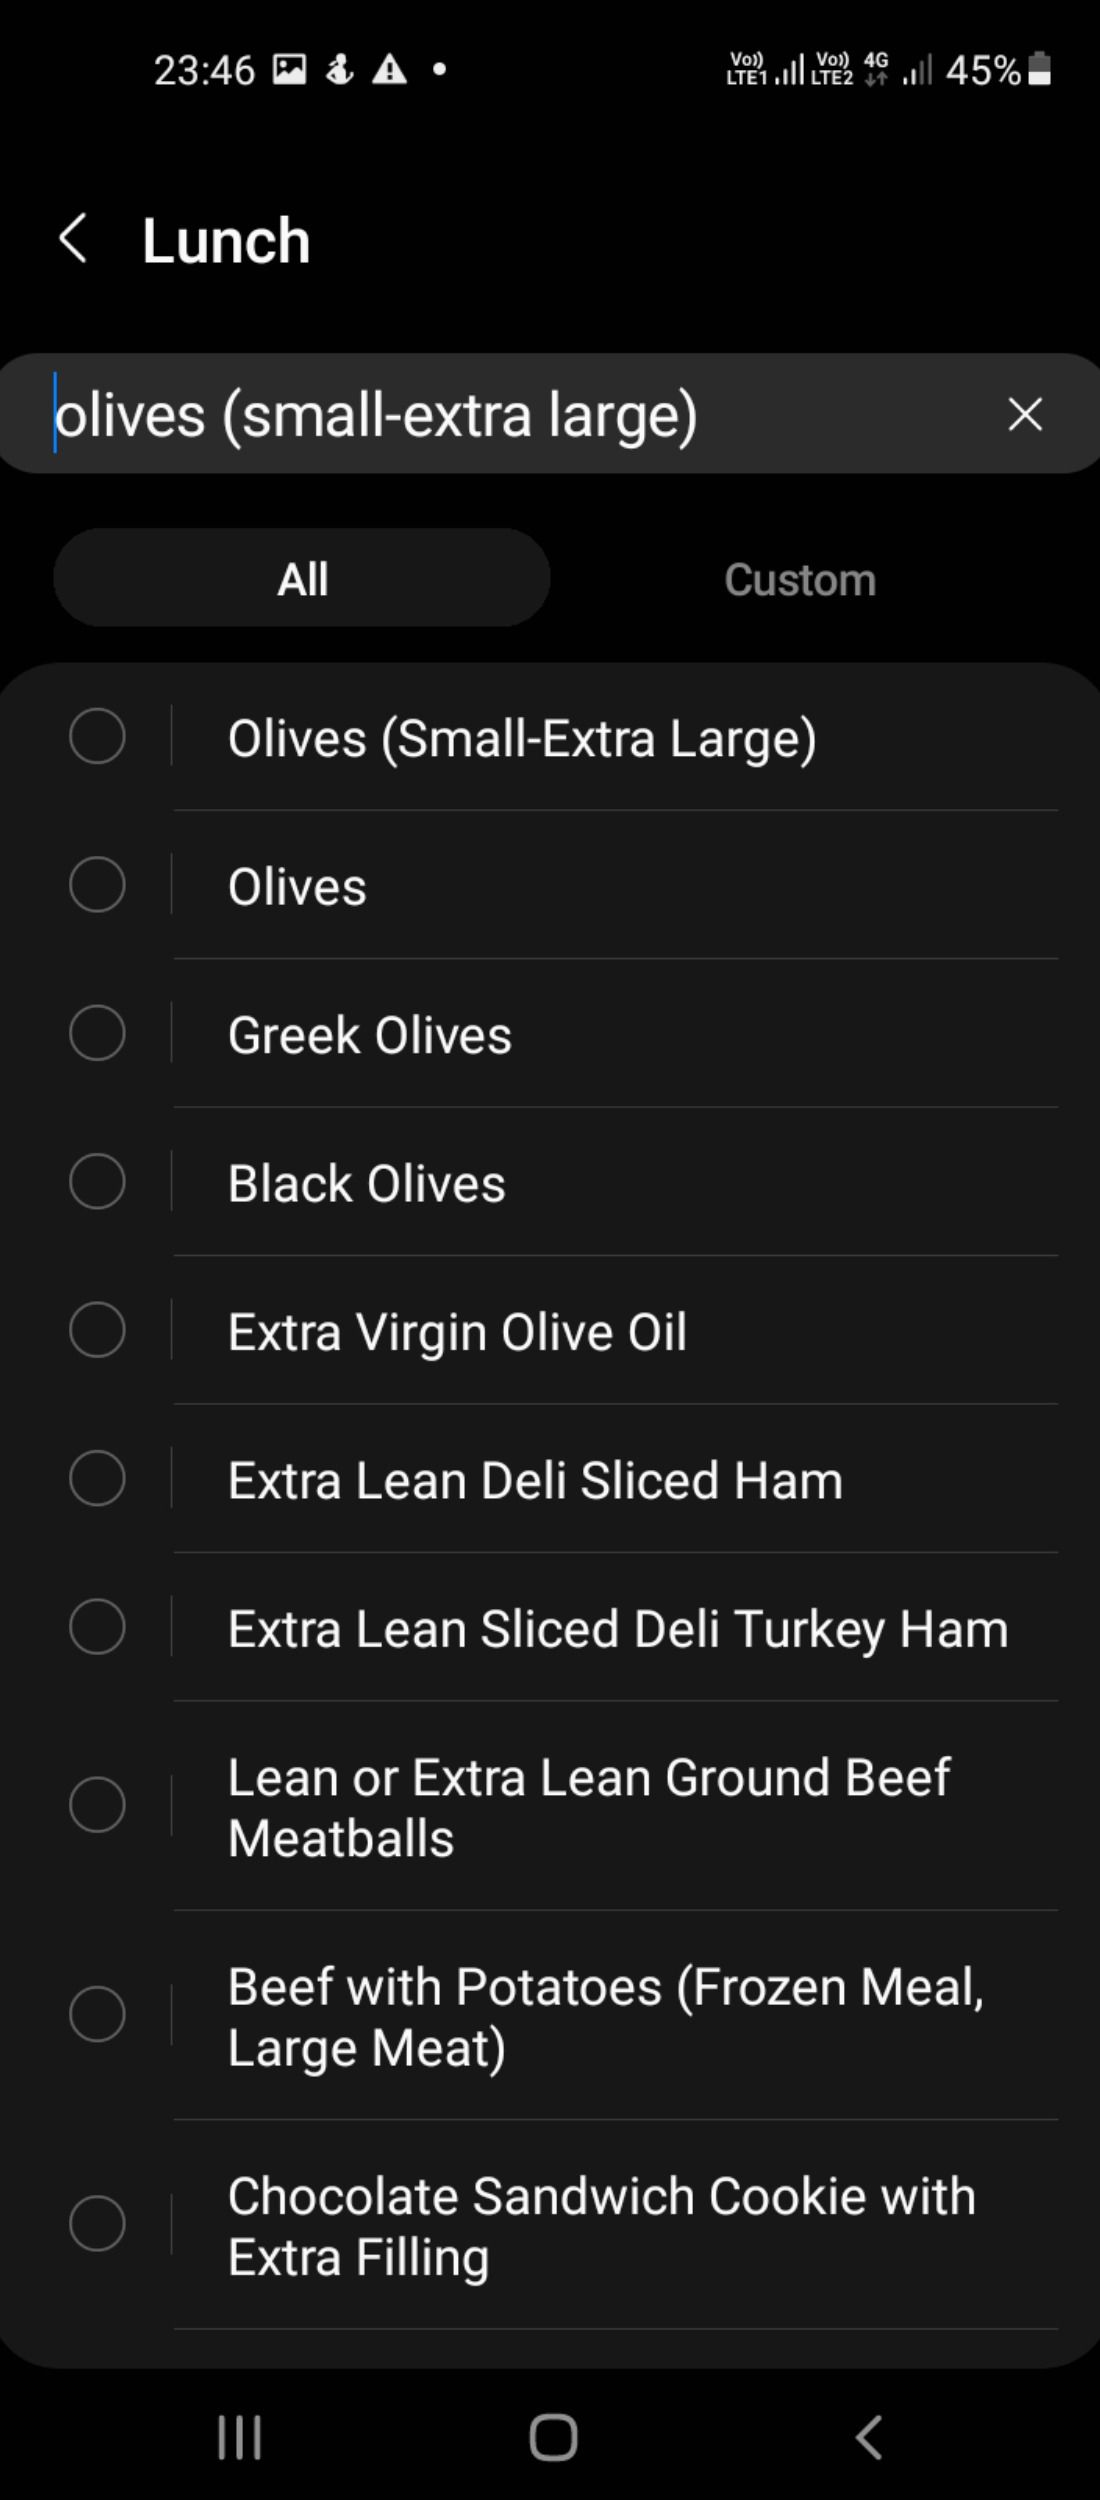 List of food items in Samsung Health